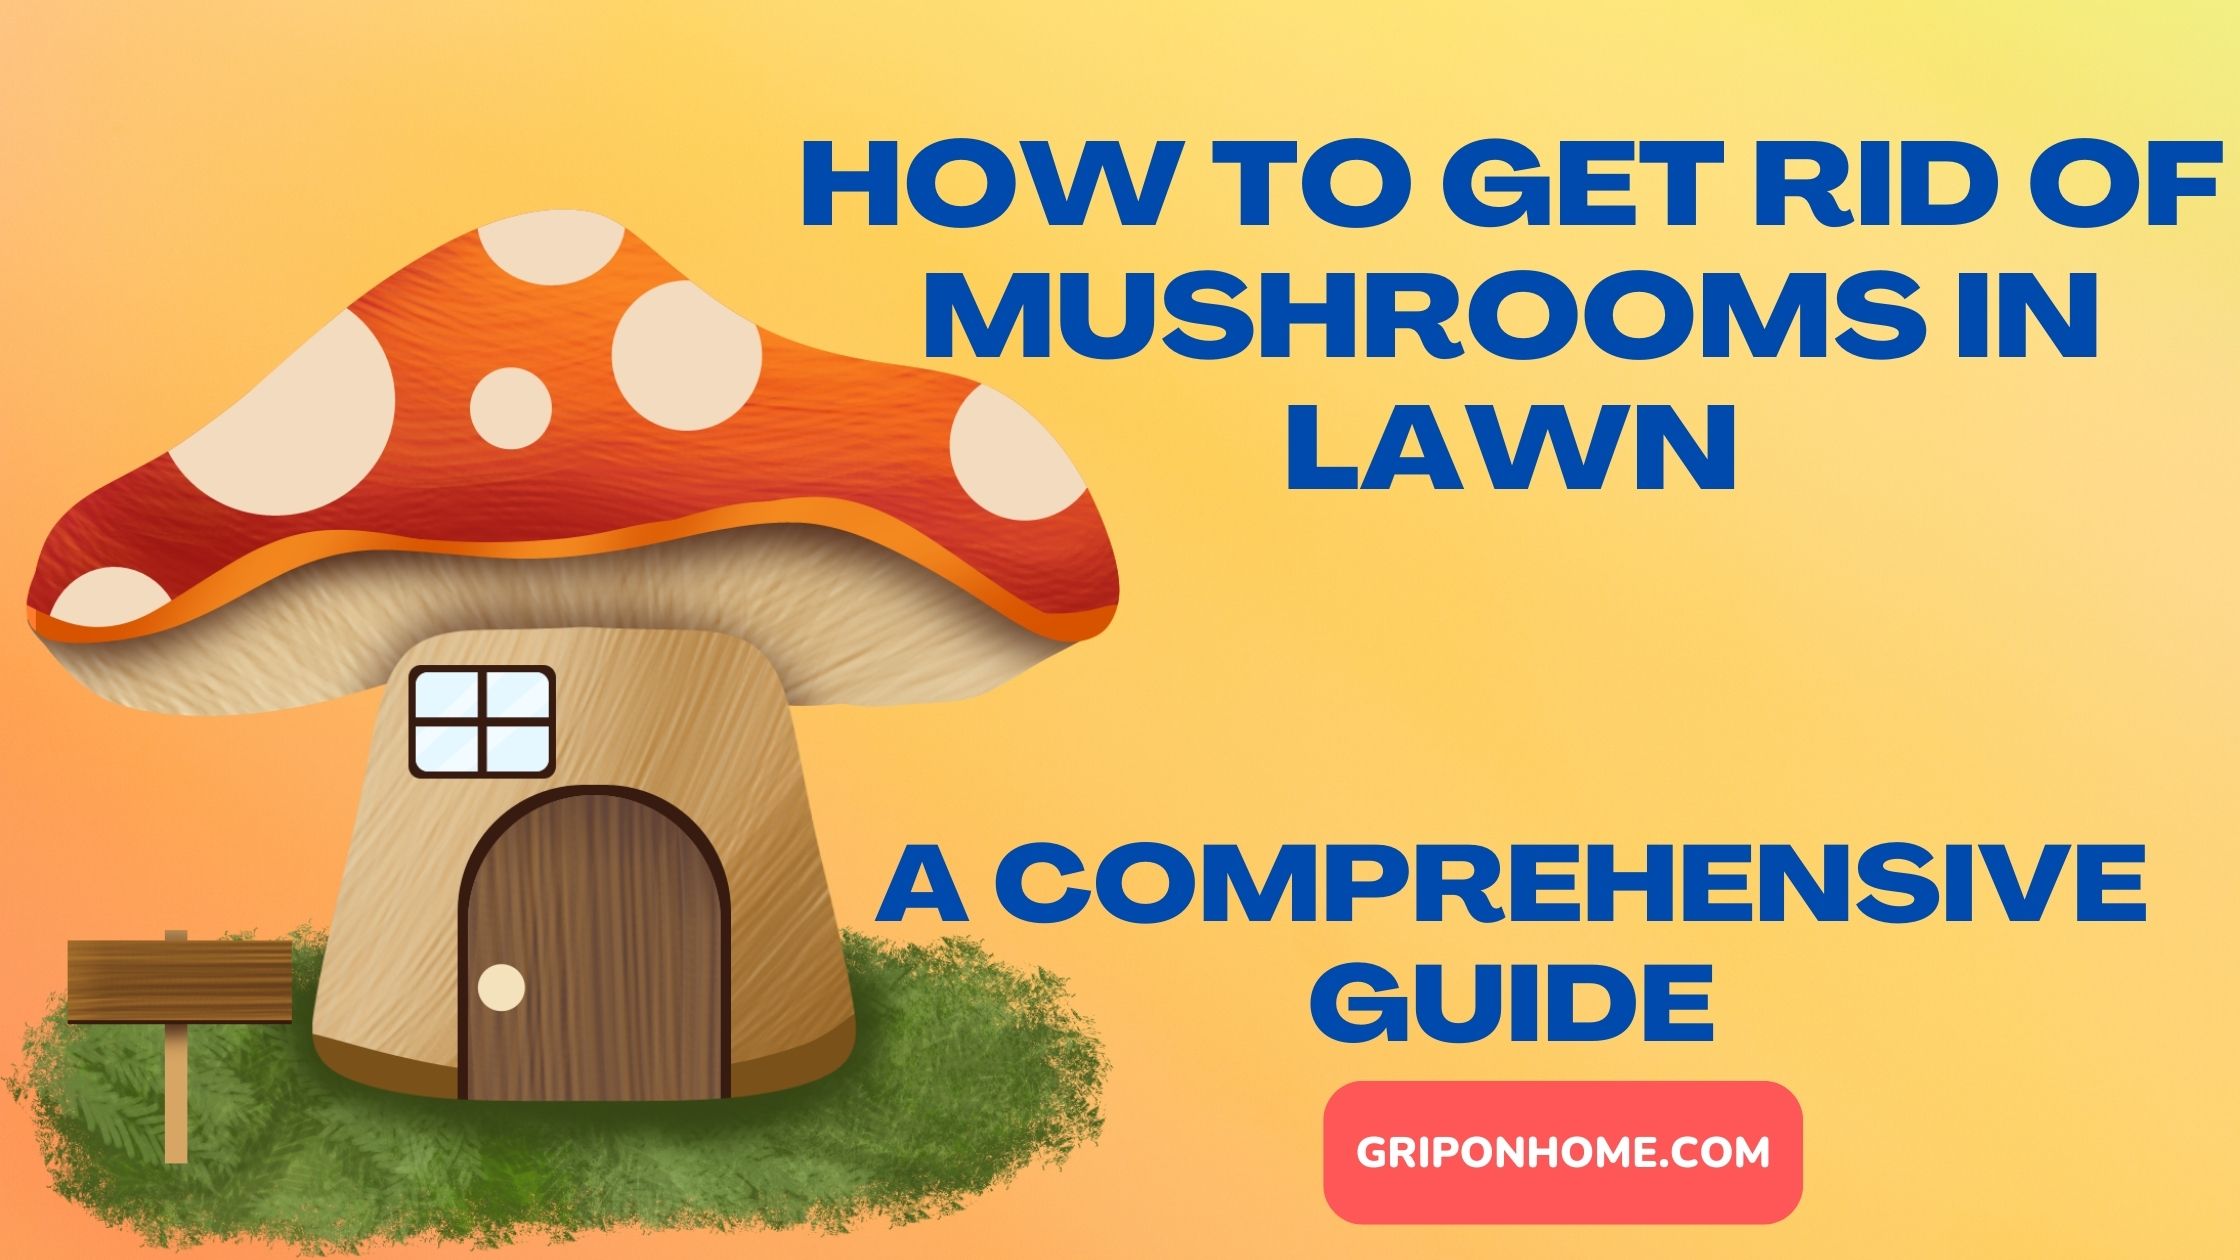 How to Get Rid of Mushrooms in Lawn